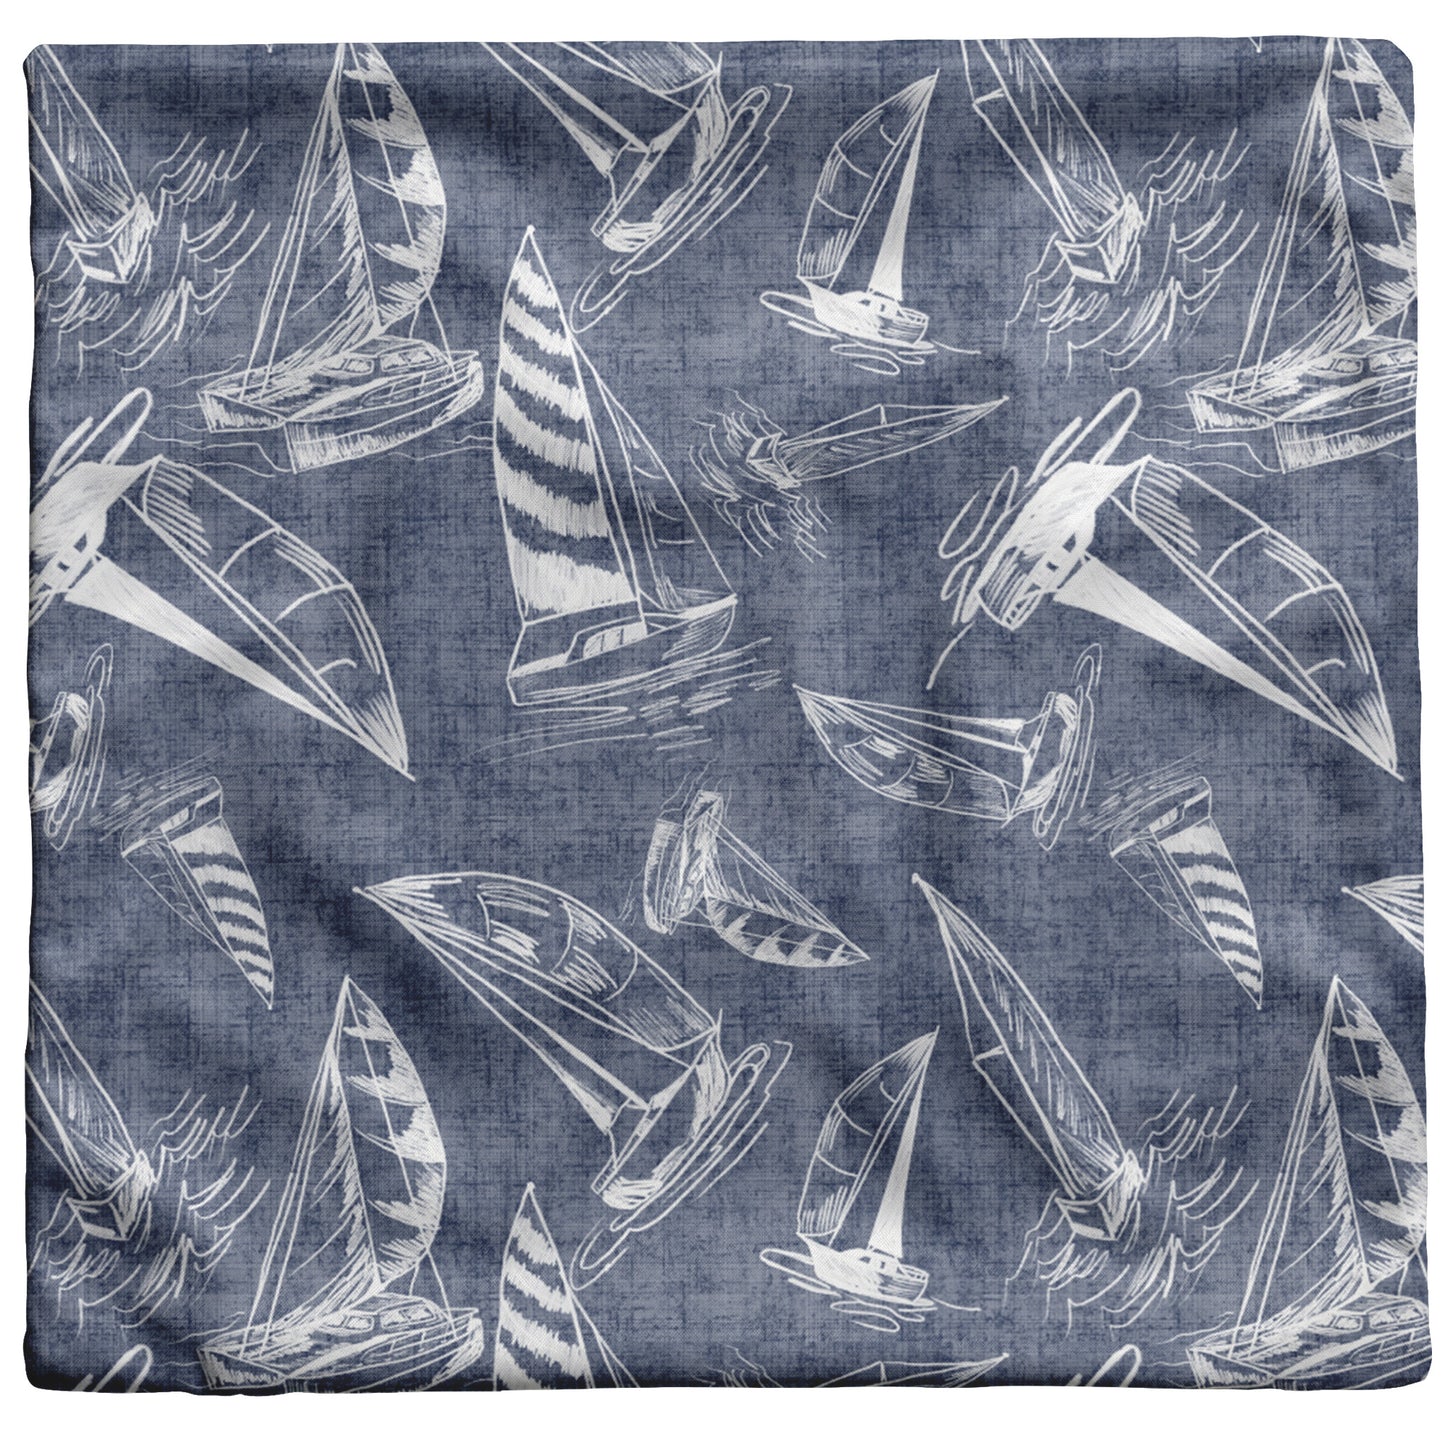 Sailboat Sketches on Navy Blue Linen Textured Background, Throw Pillow